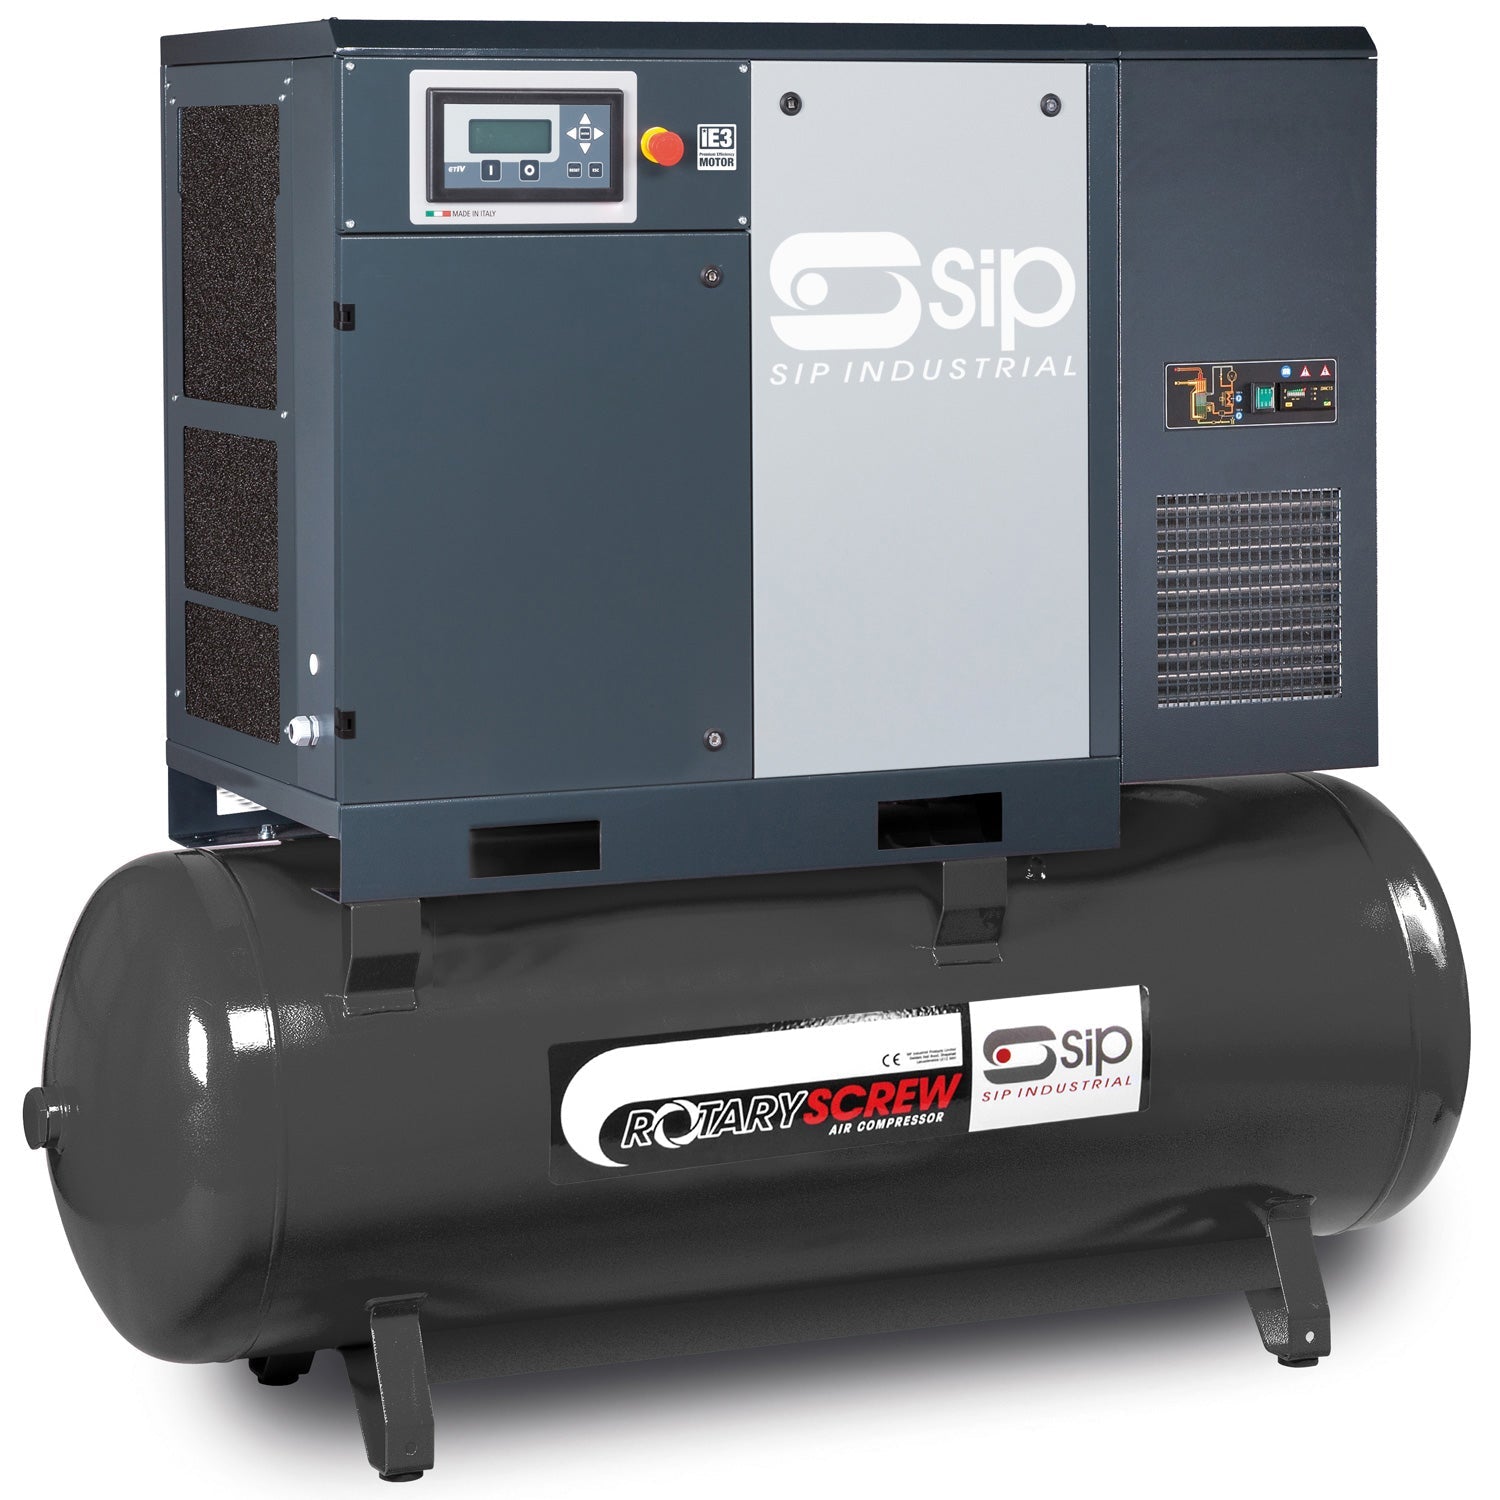 SIP RS15-10-500DD/RD 500ltr Rotary Screw Compressor with Dryer